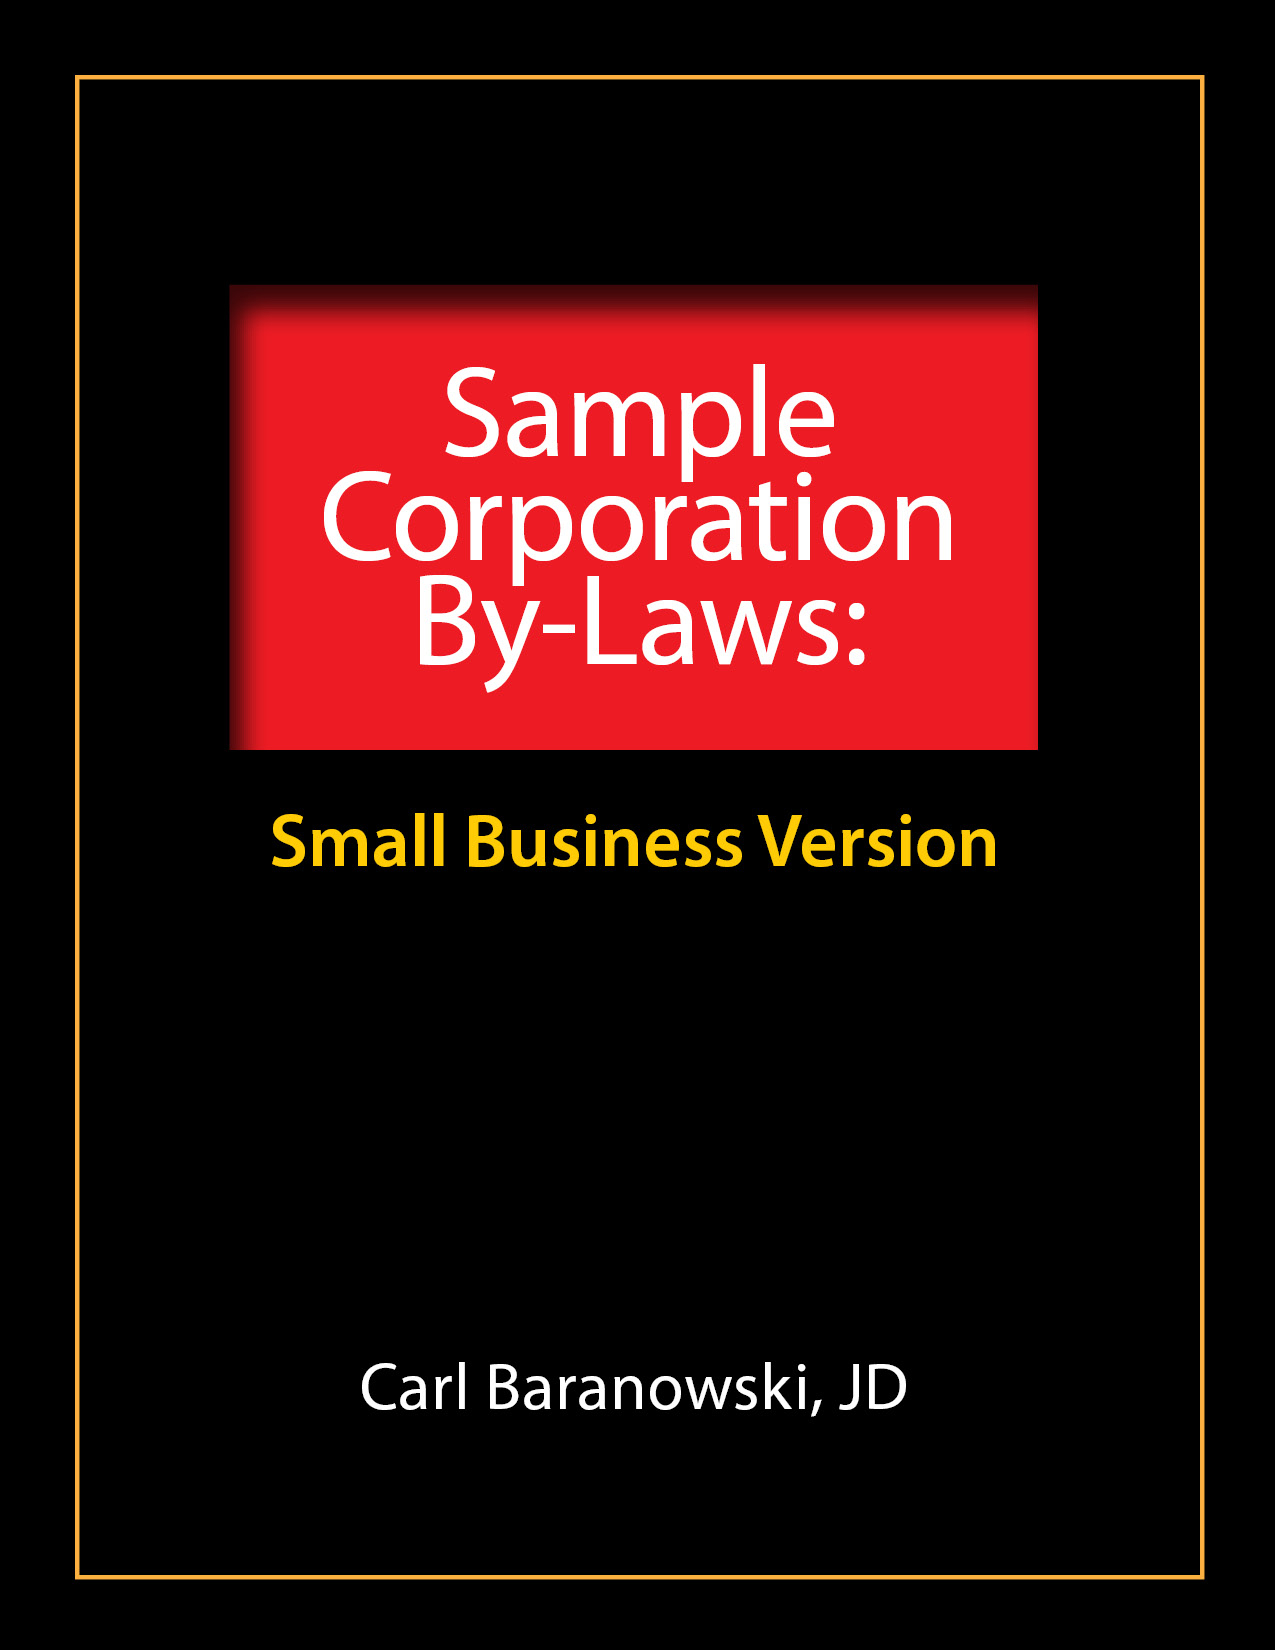 S Corp Operating Agreement Template Sample Corporate Laws Evergreen Small Business